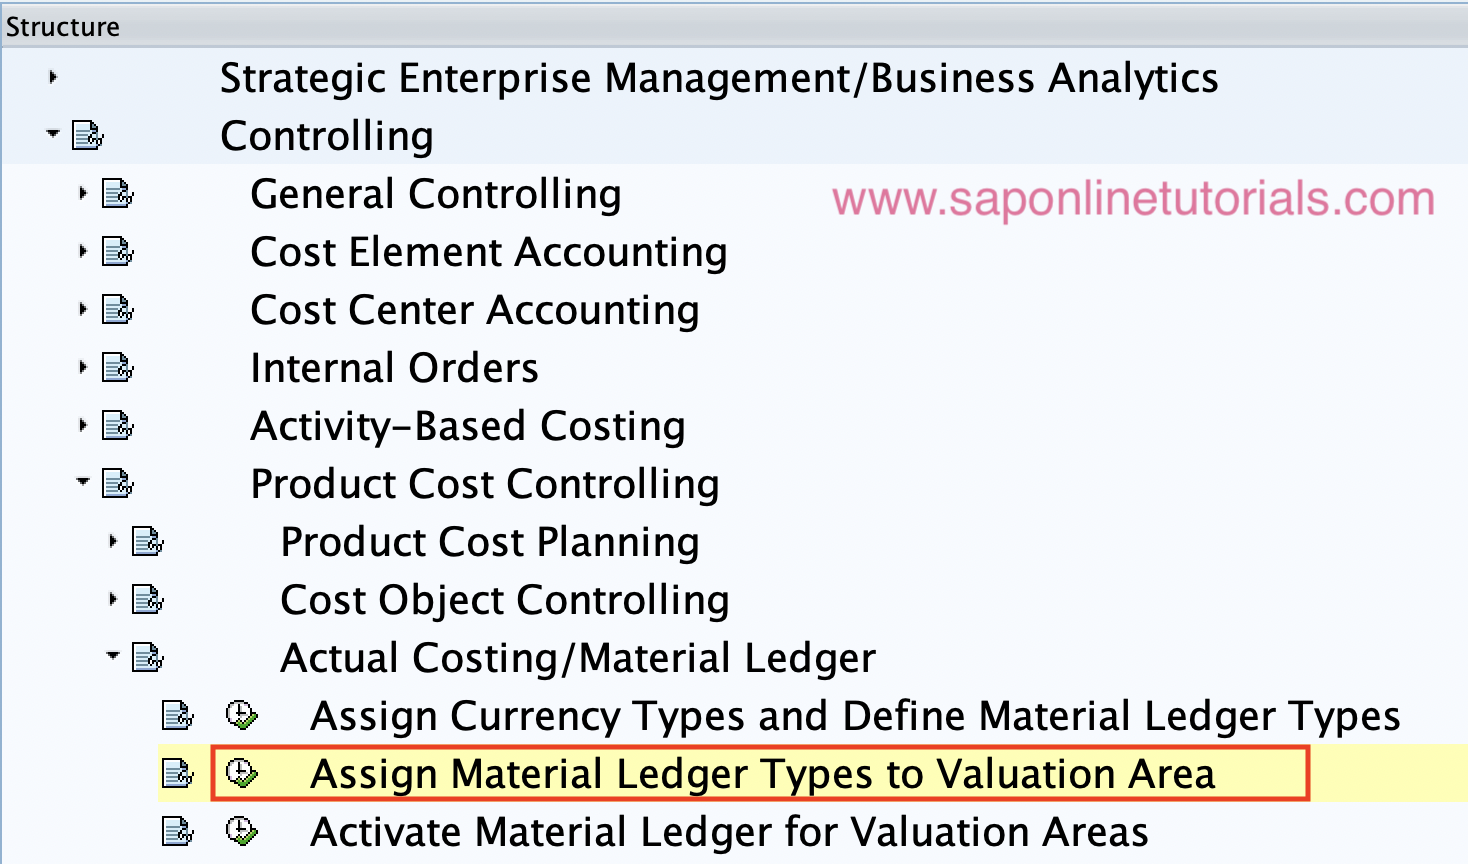 plant and valuation type assignment in sap